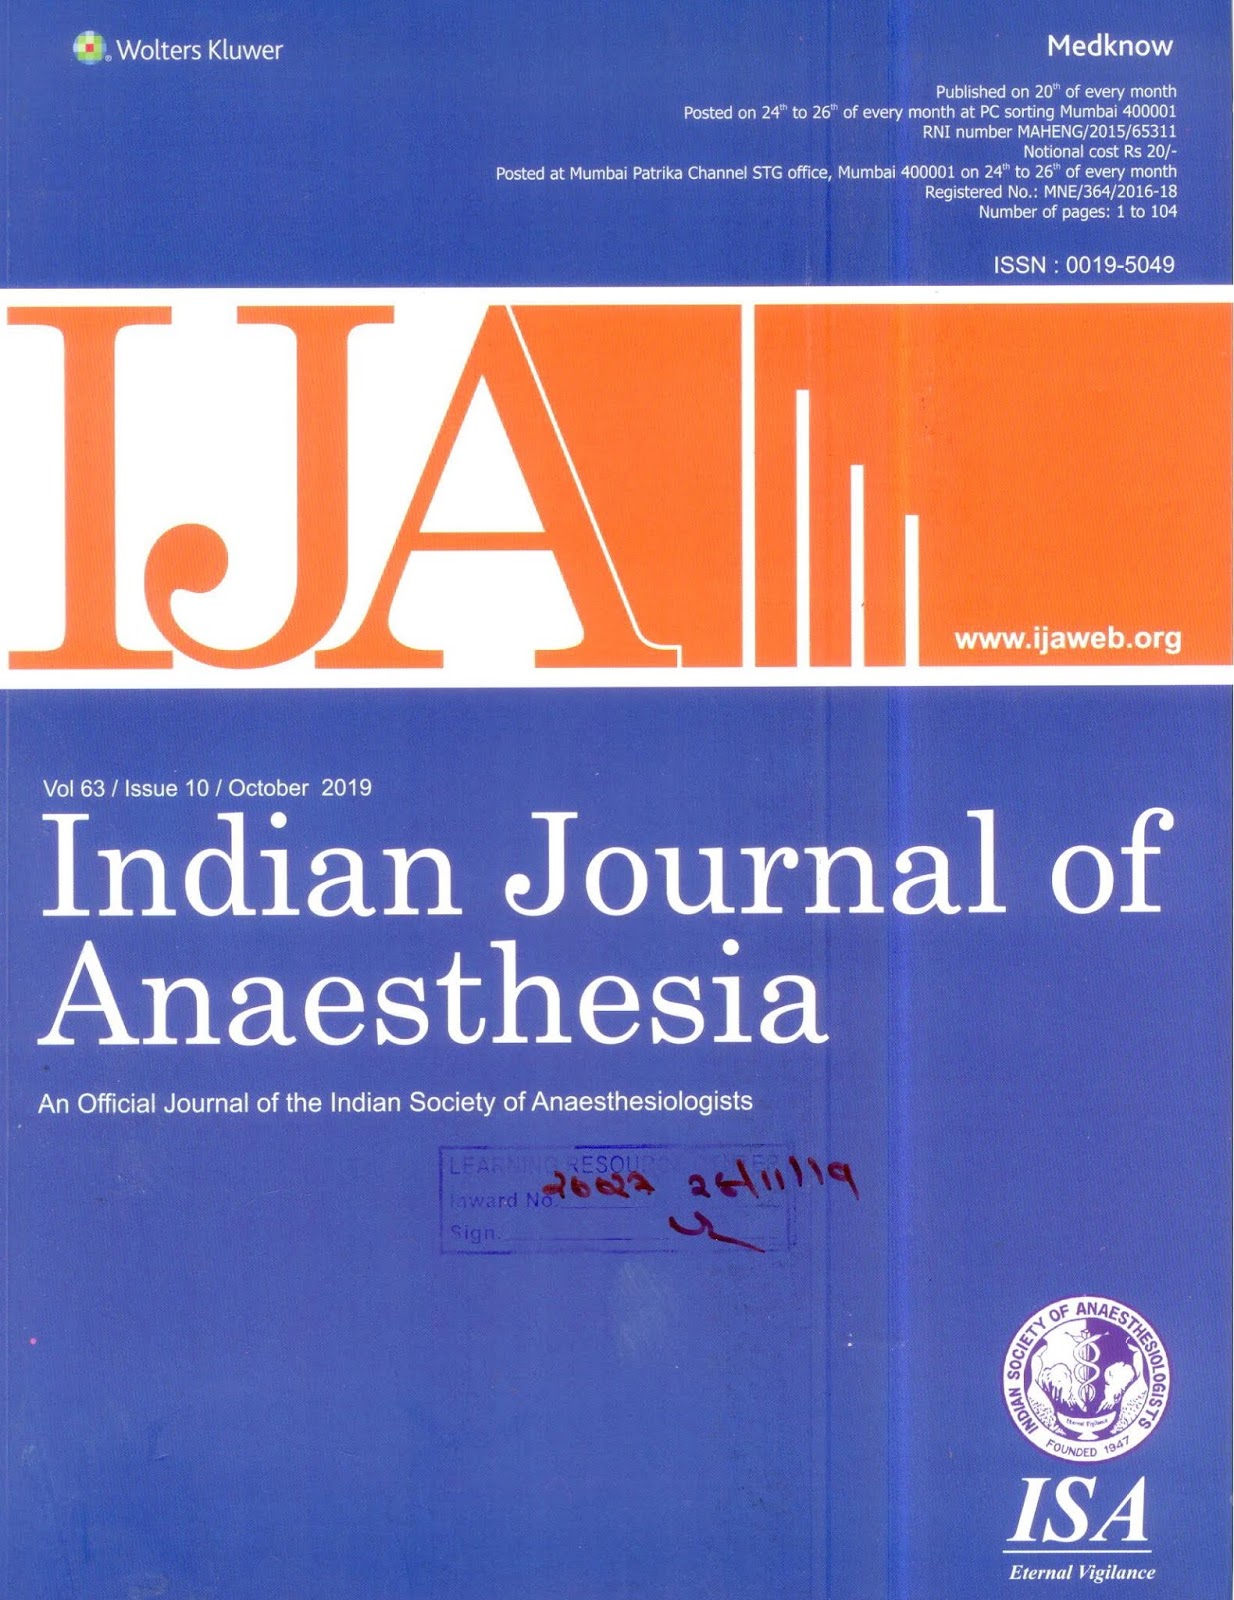 http://www.ijaweb.org/showBackIssue.asp?issn=0019-5049;year=2019;volume=63;issue=10;month=October